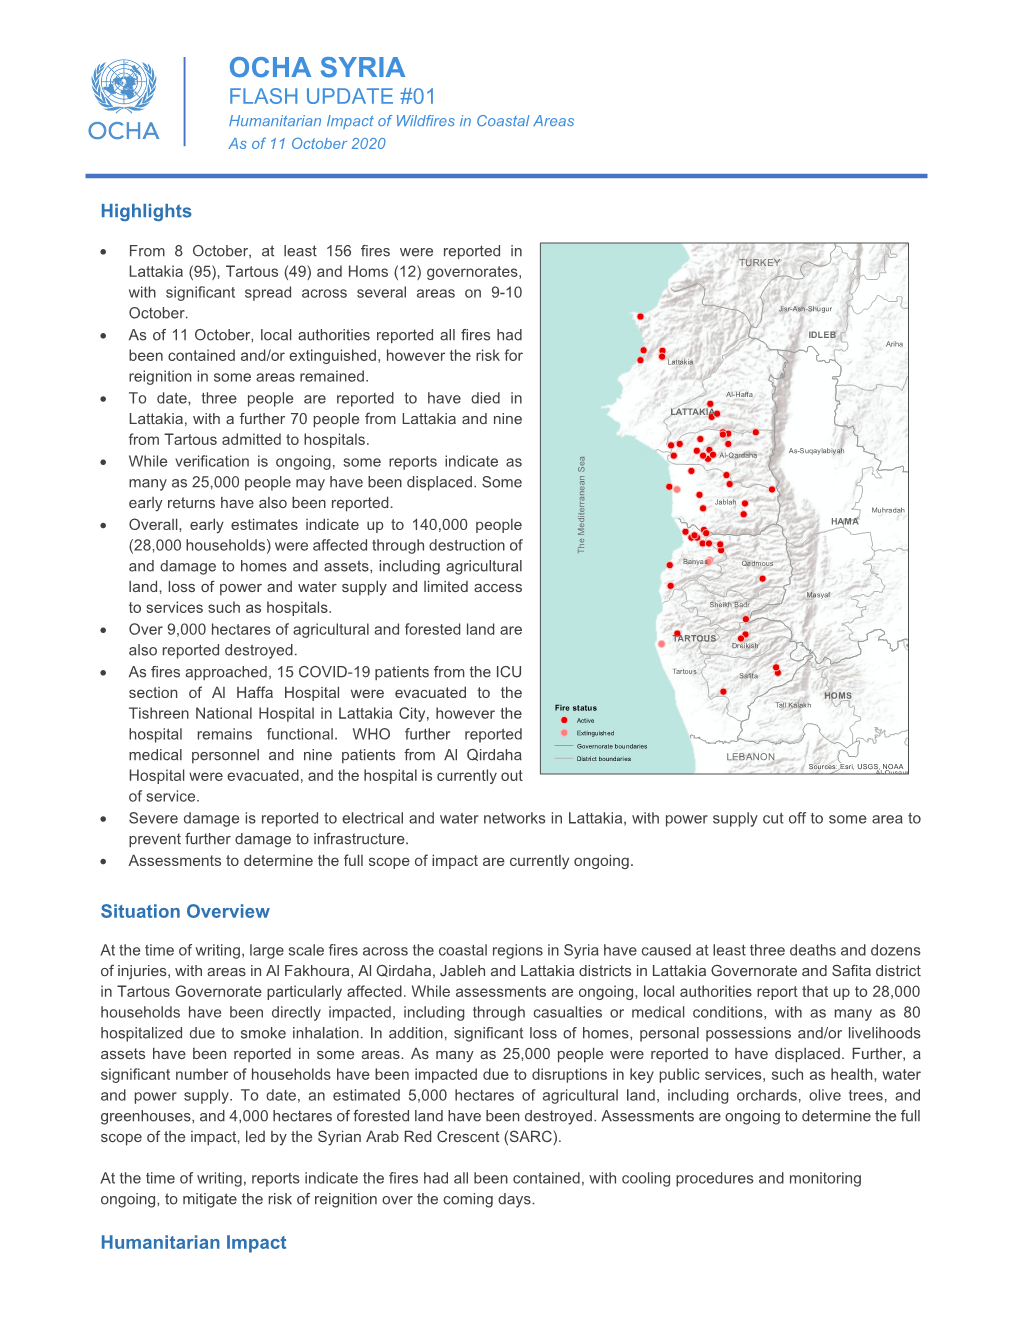 OCHA SYRIA FLASH UPDATE #01 Humanitarian Impact of Wildfires in Coastal Areas As of 11 October 2020